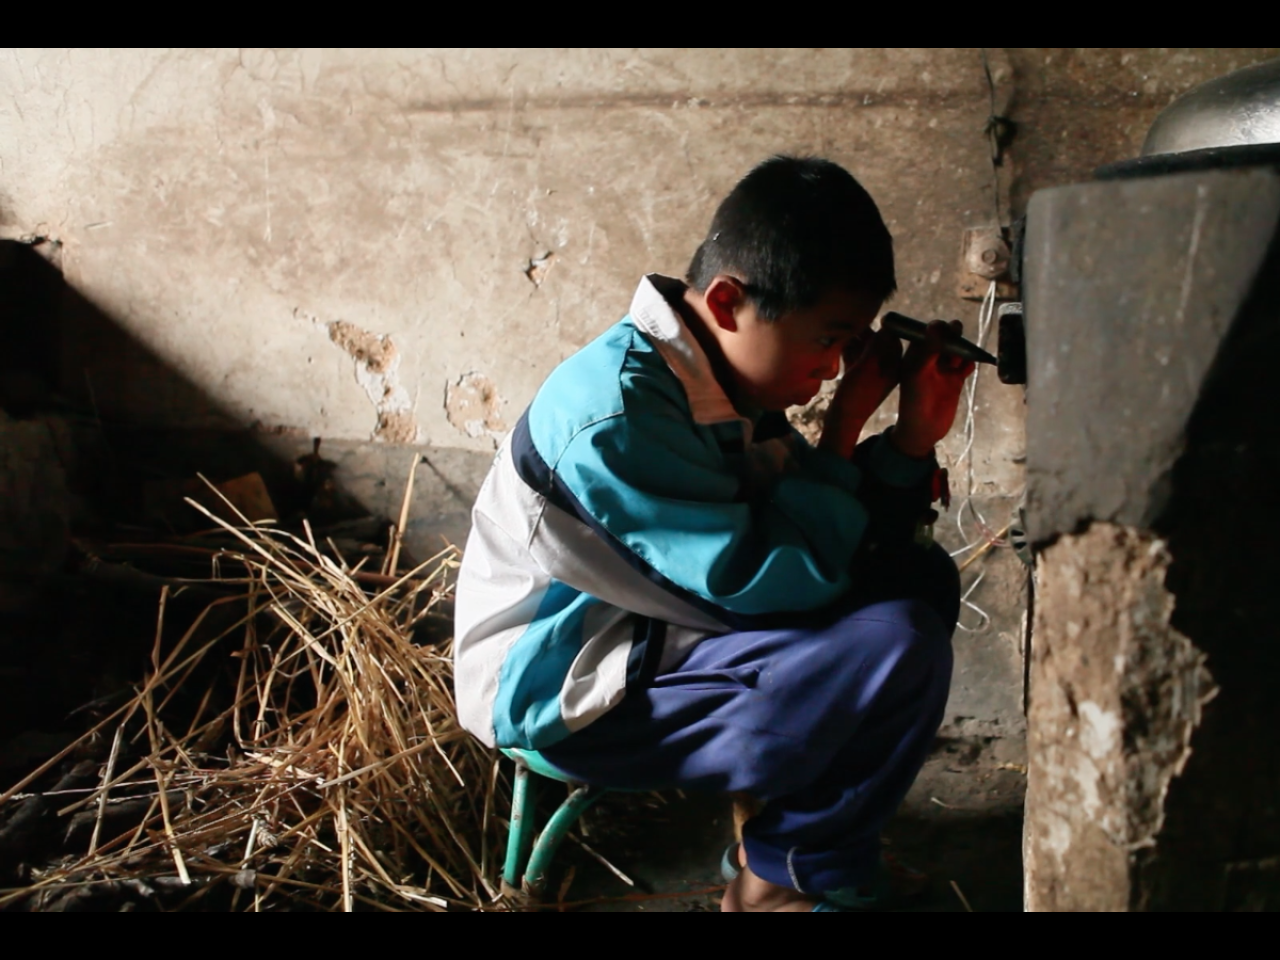 A young Chinese boy, maybe ten years old, sits on a low stool, working intensively on an electrical device attached to an old decaying structure.